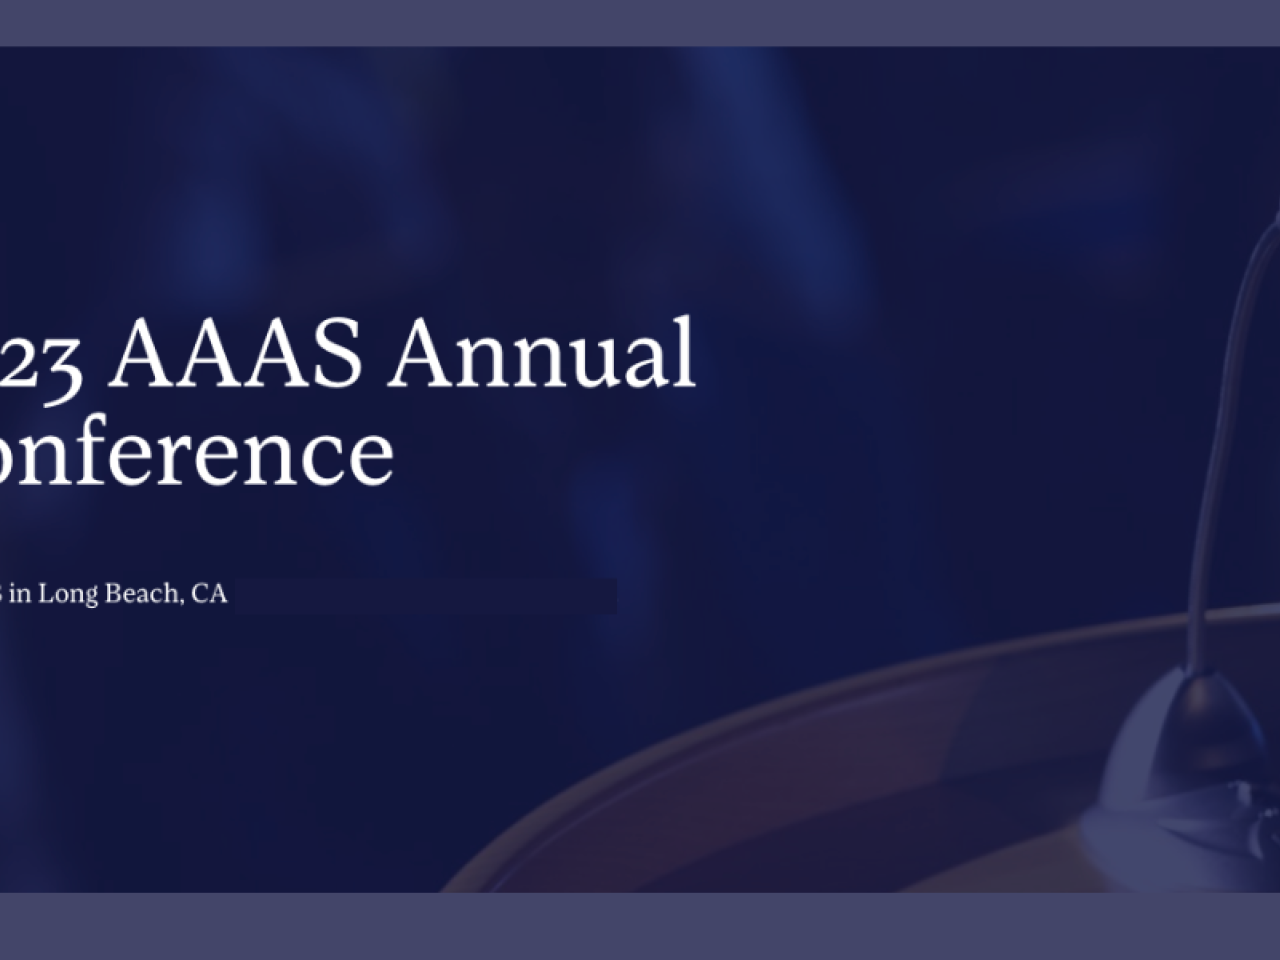 20223 AAAS Annual Conference april 6-8 in Long beach, ca over dark blue background with image of podium microphone